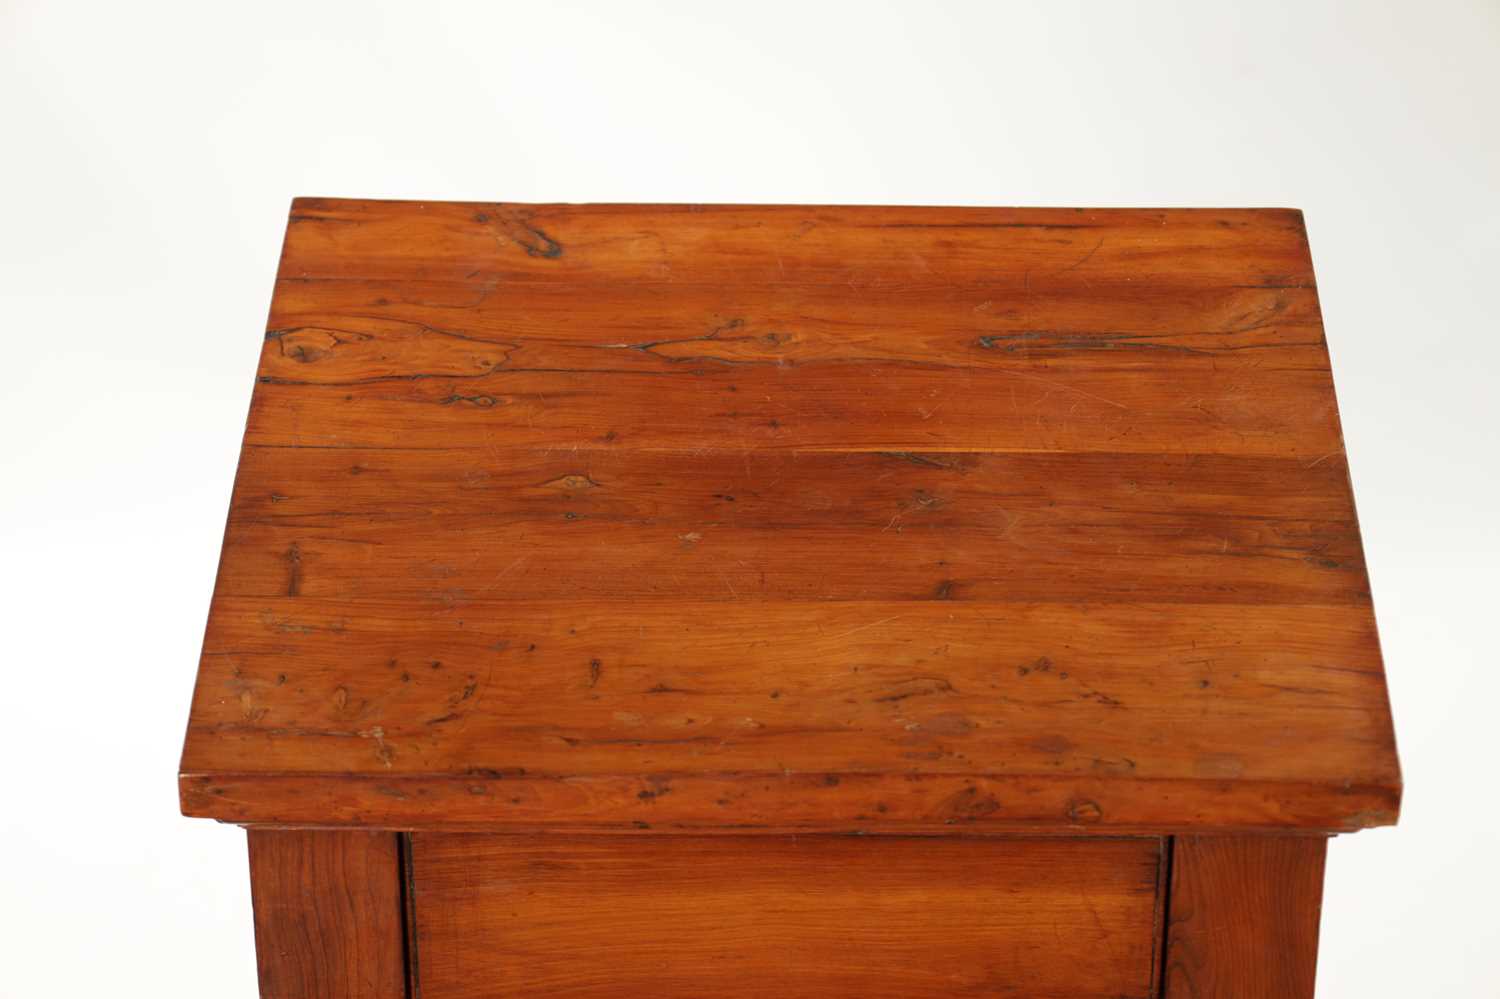 AN 18TH CENTURY EMPIRE STYLE YEW-WOOD BEDSIDE CABINET - Image 2 of 9